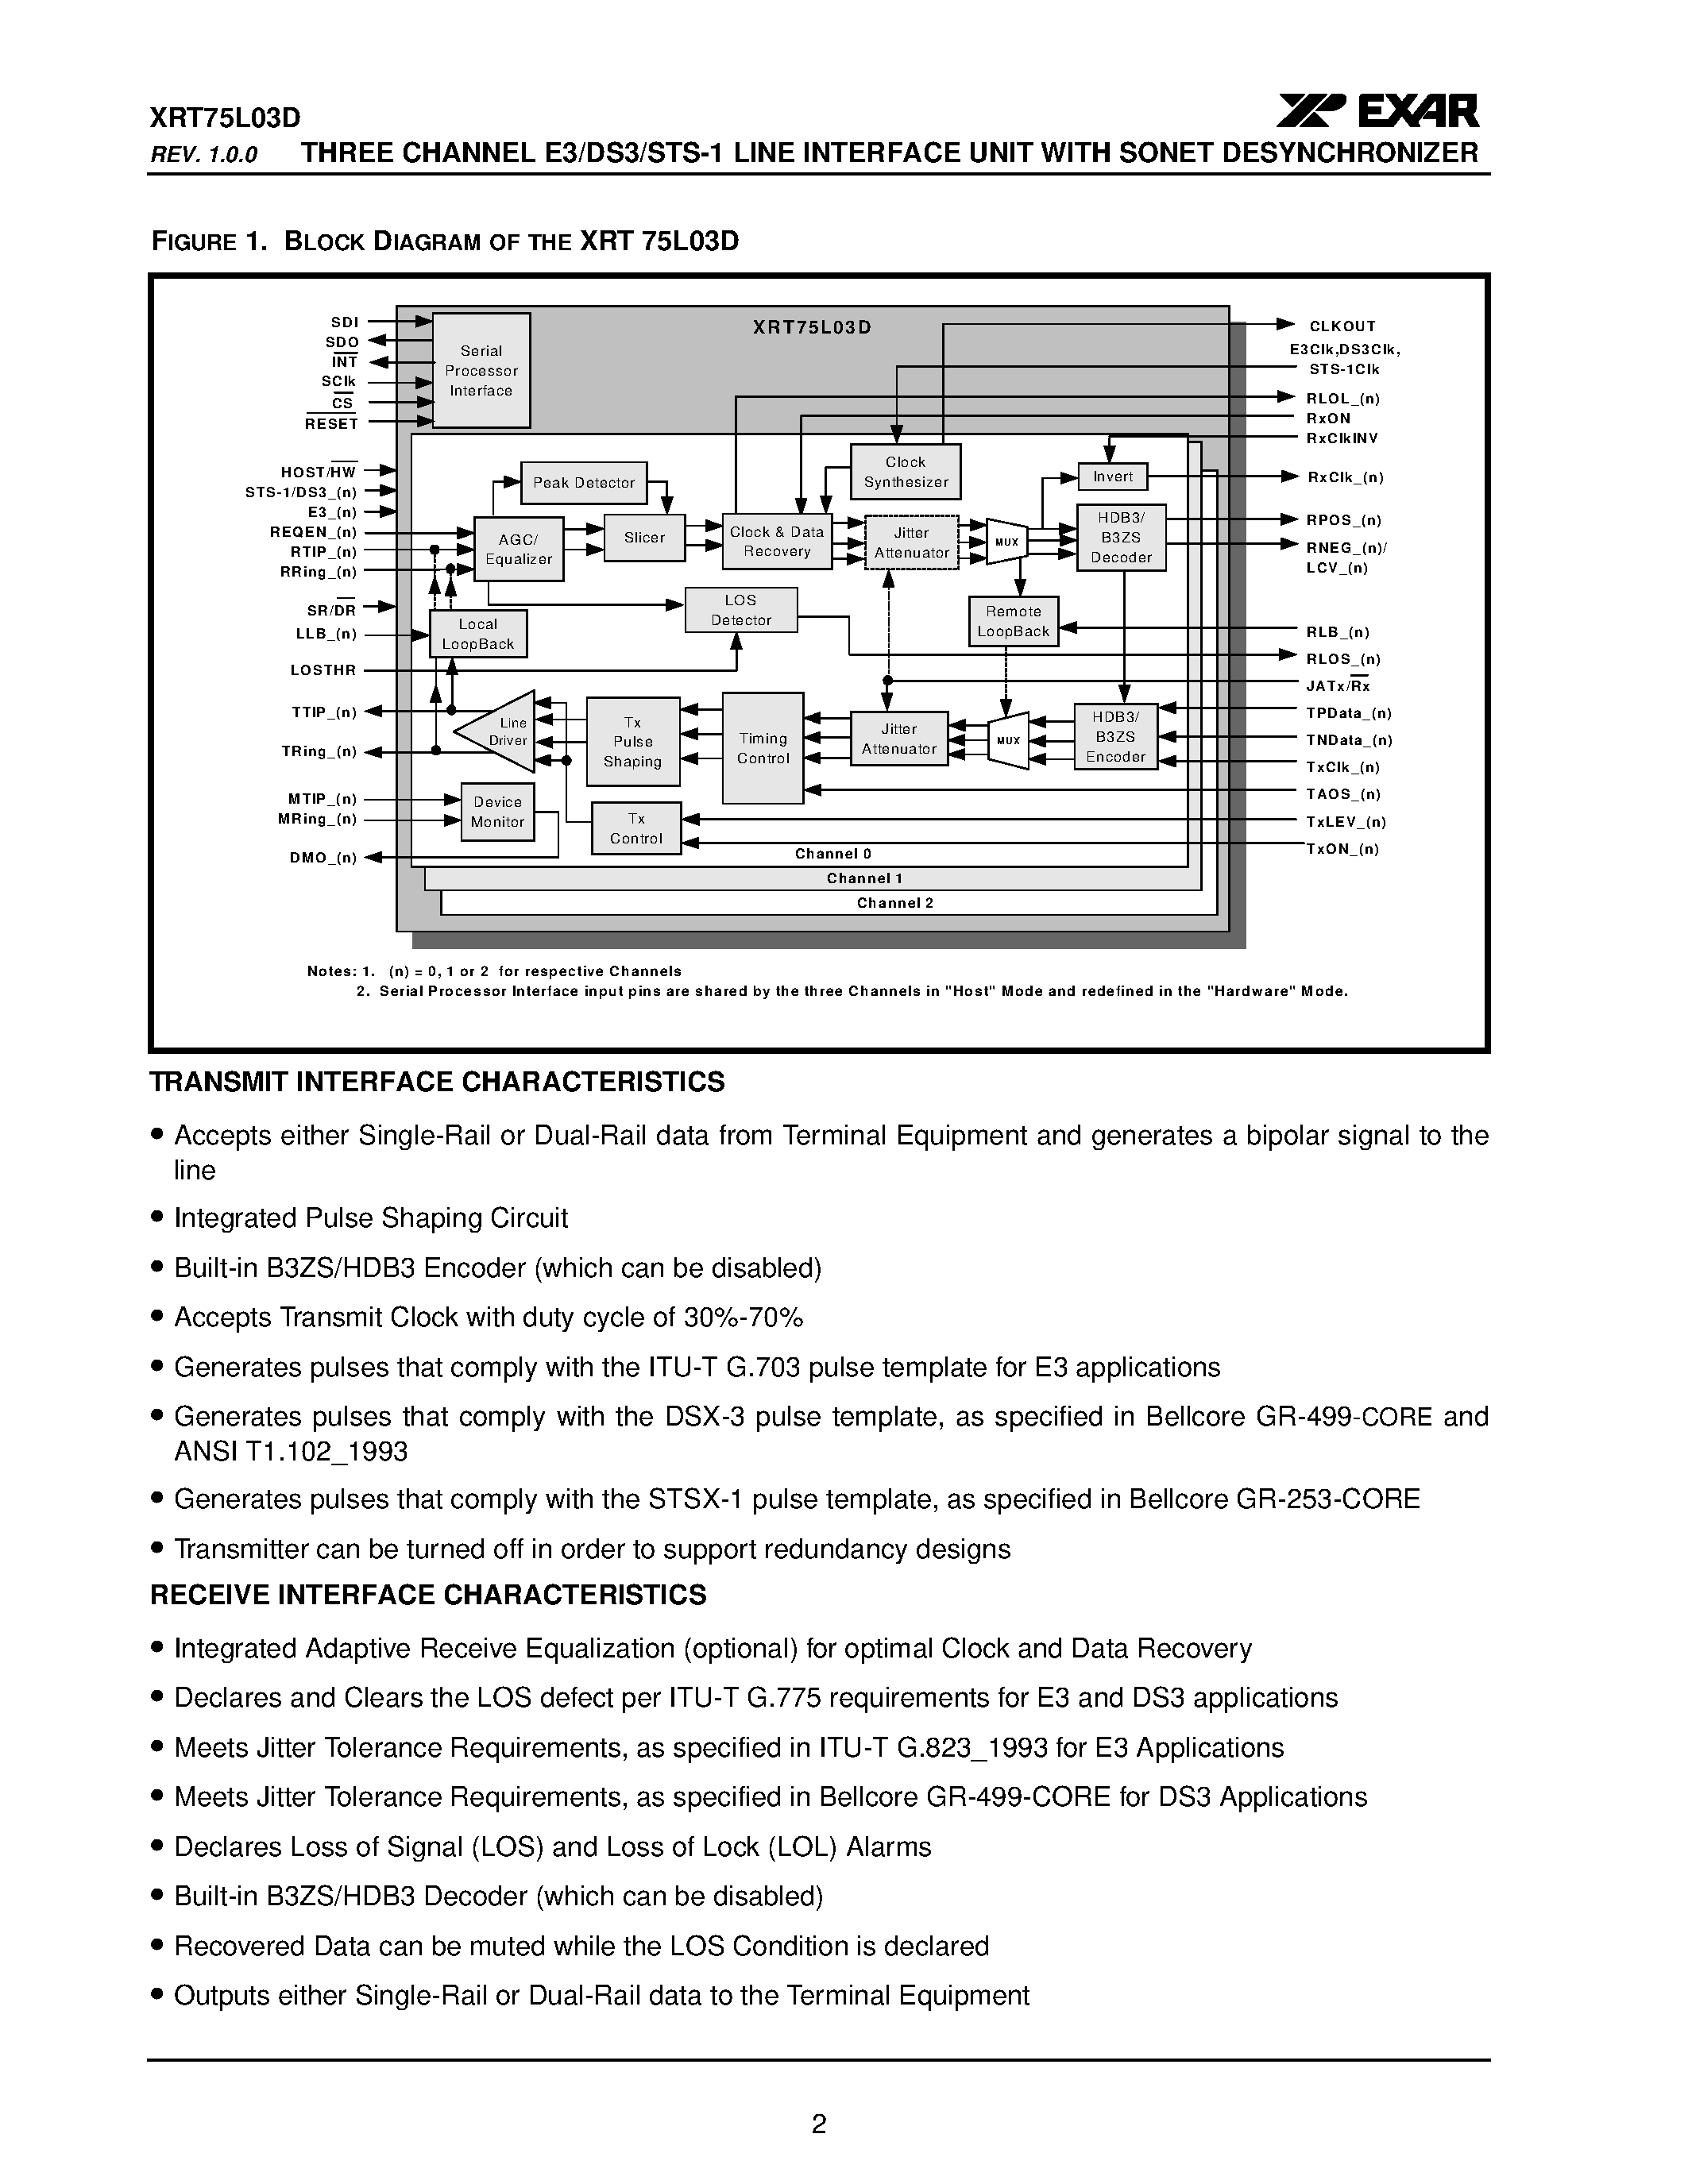 Datasheet XRT75L03D - THREE CHANNEL E3/DS3/STS-1 LINE INTERFACE UNIT page 2